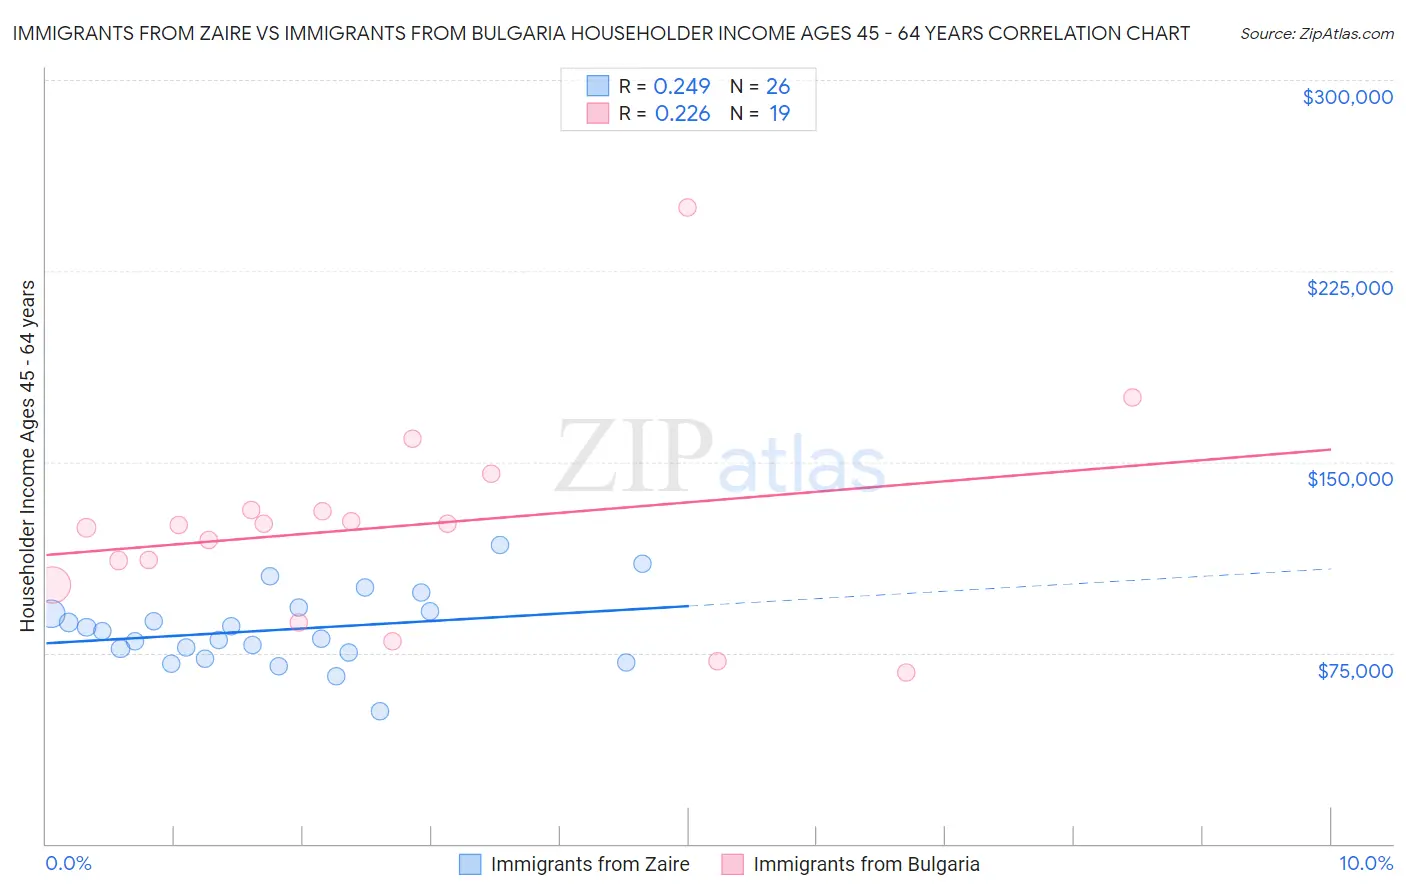 Immigrants from Zaire vs Immigrants from Bulgaria Householder Income Ages 45 - 64 years